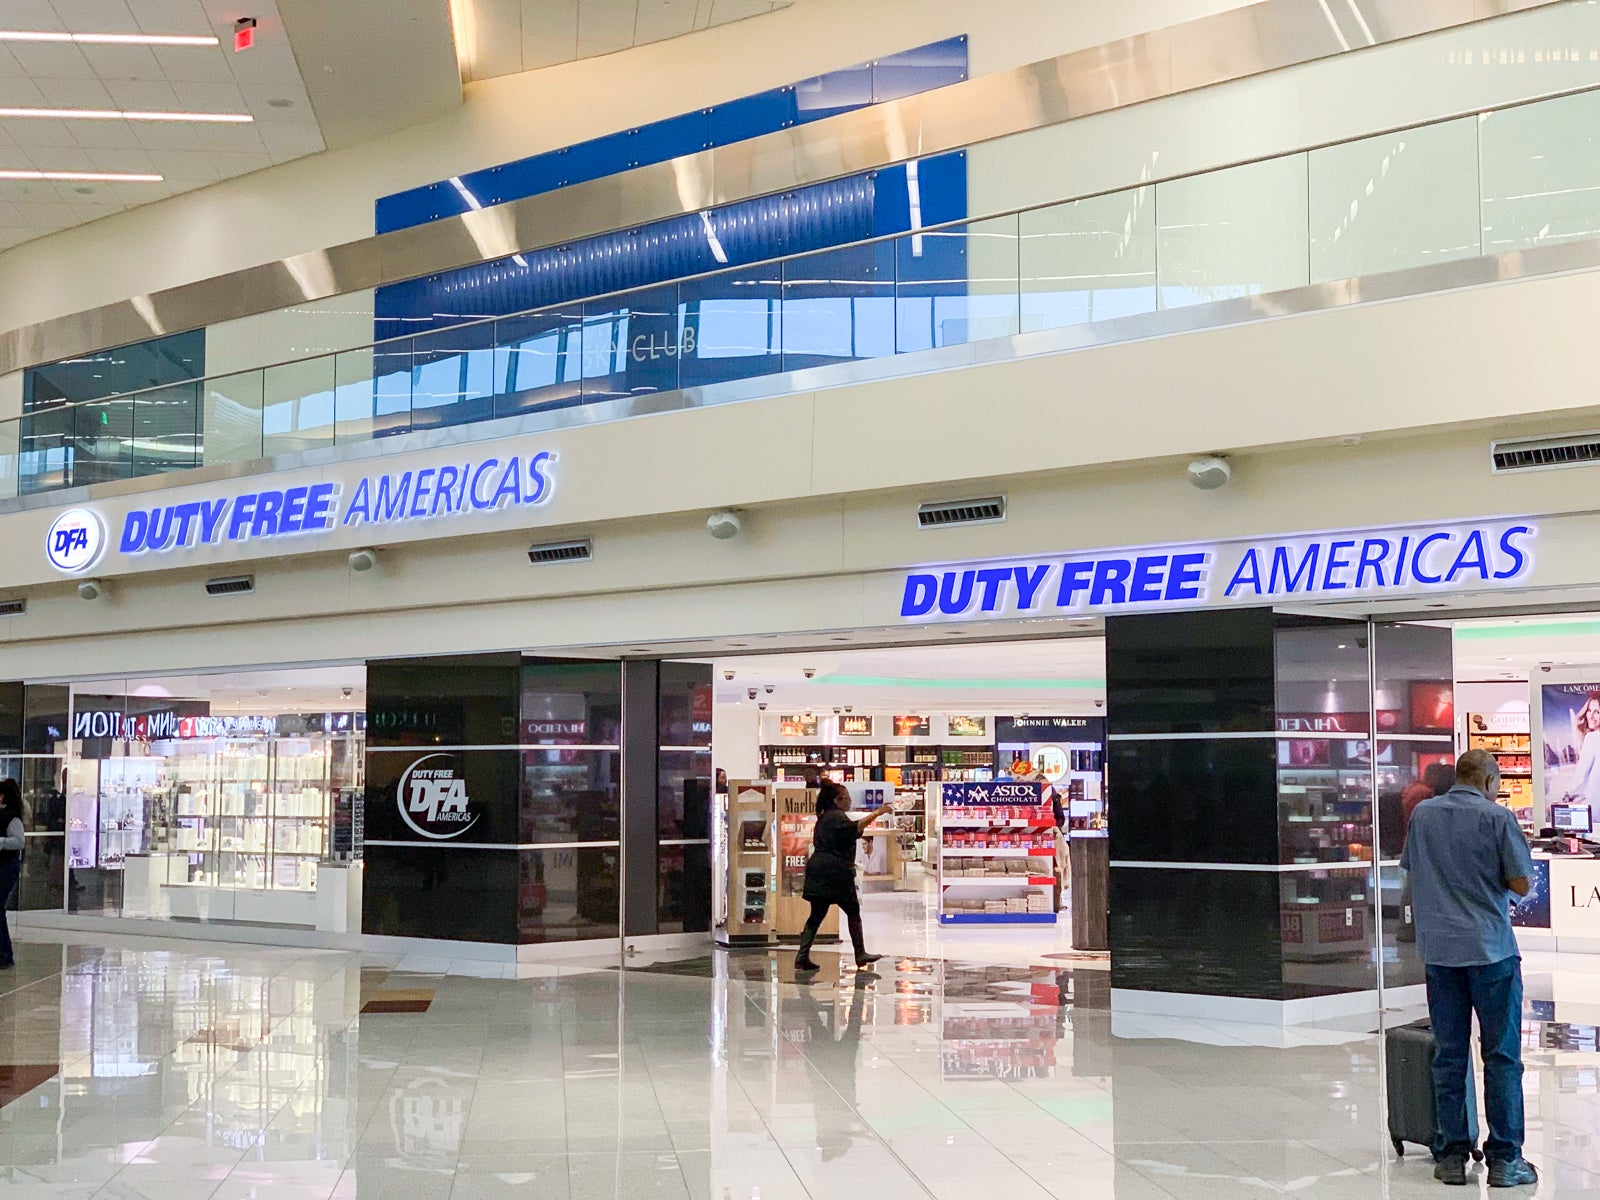 How To Get The Best Value Out of Duty Free Shopping